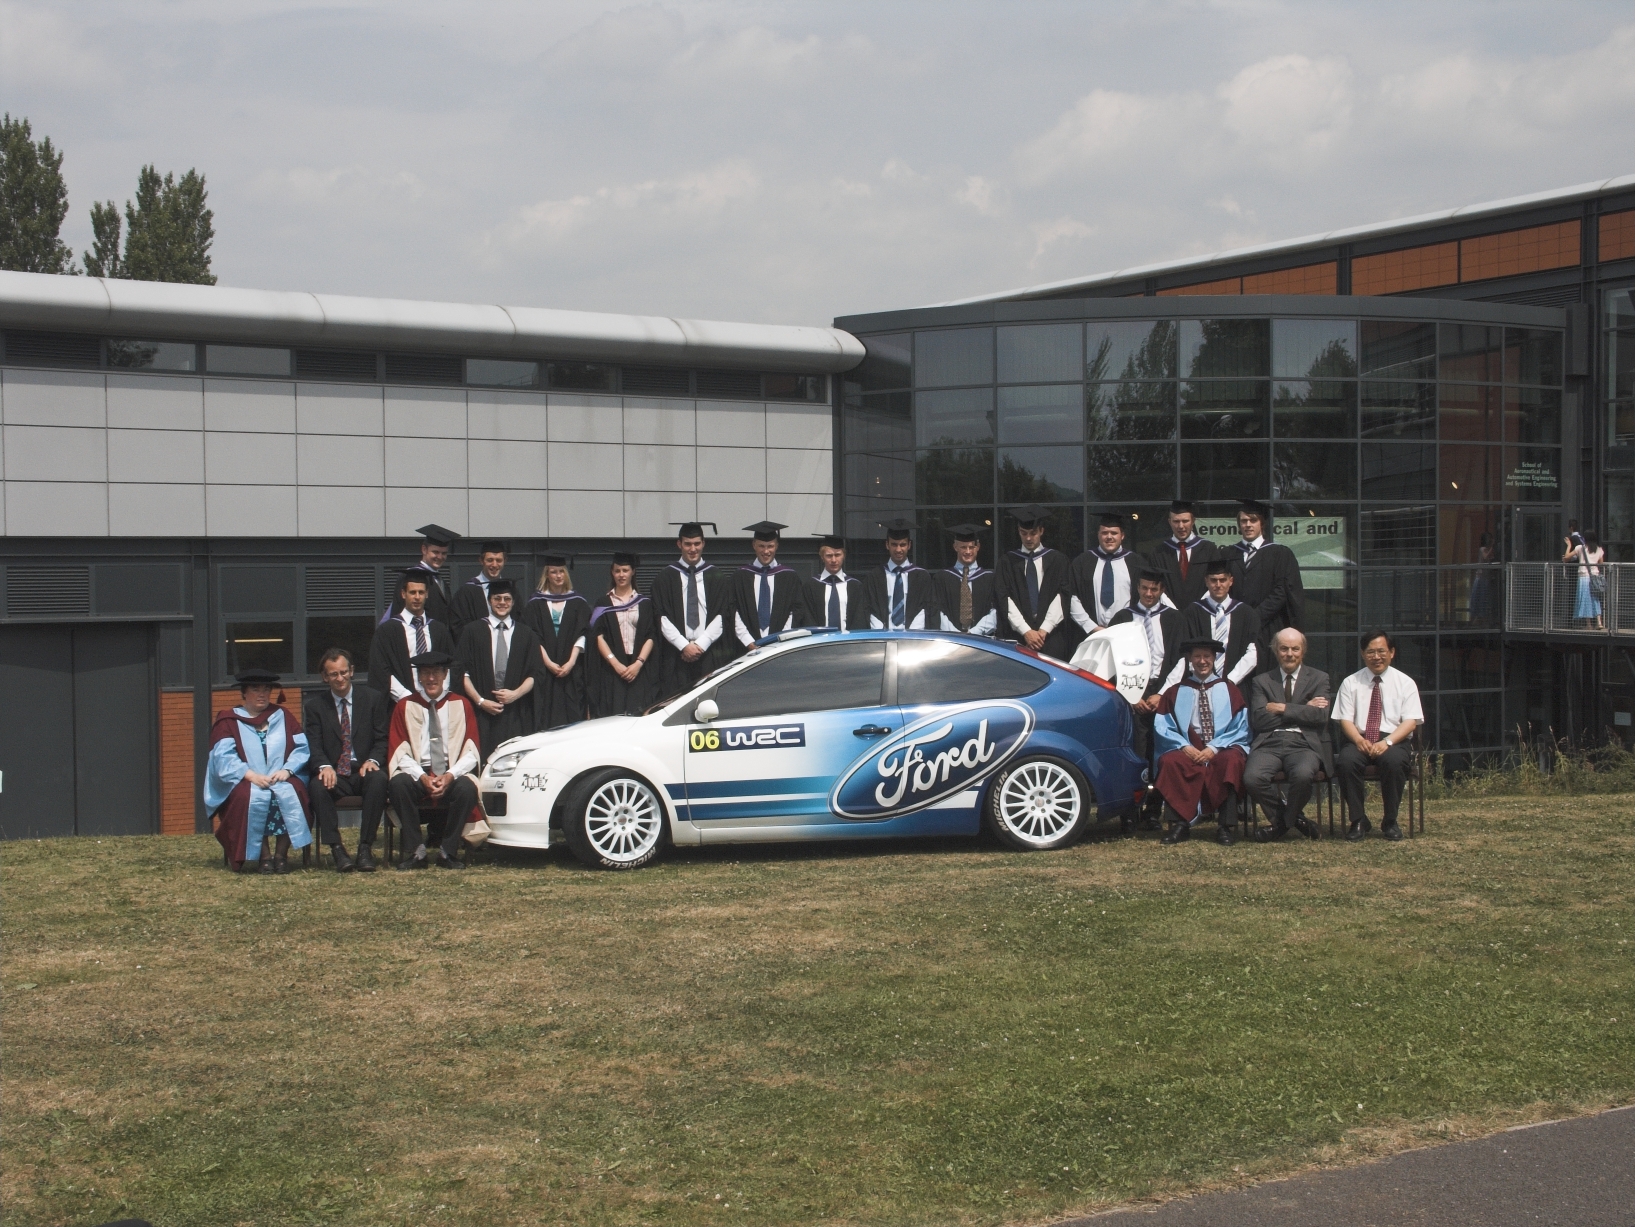 The Automotove Engineering Masters